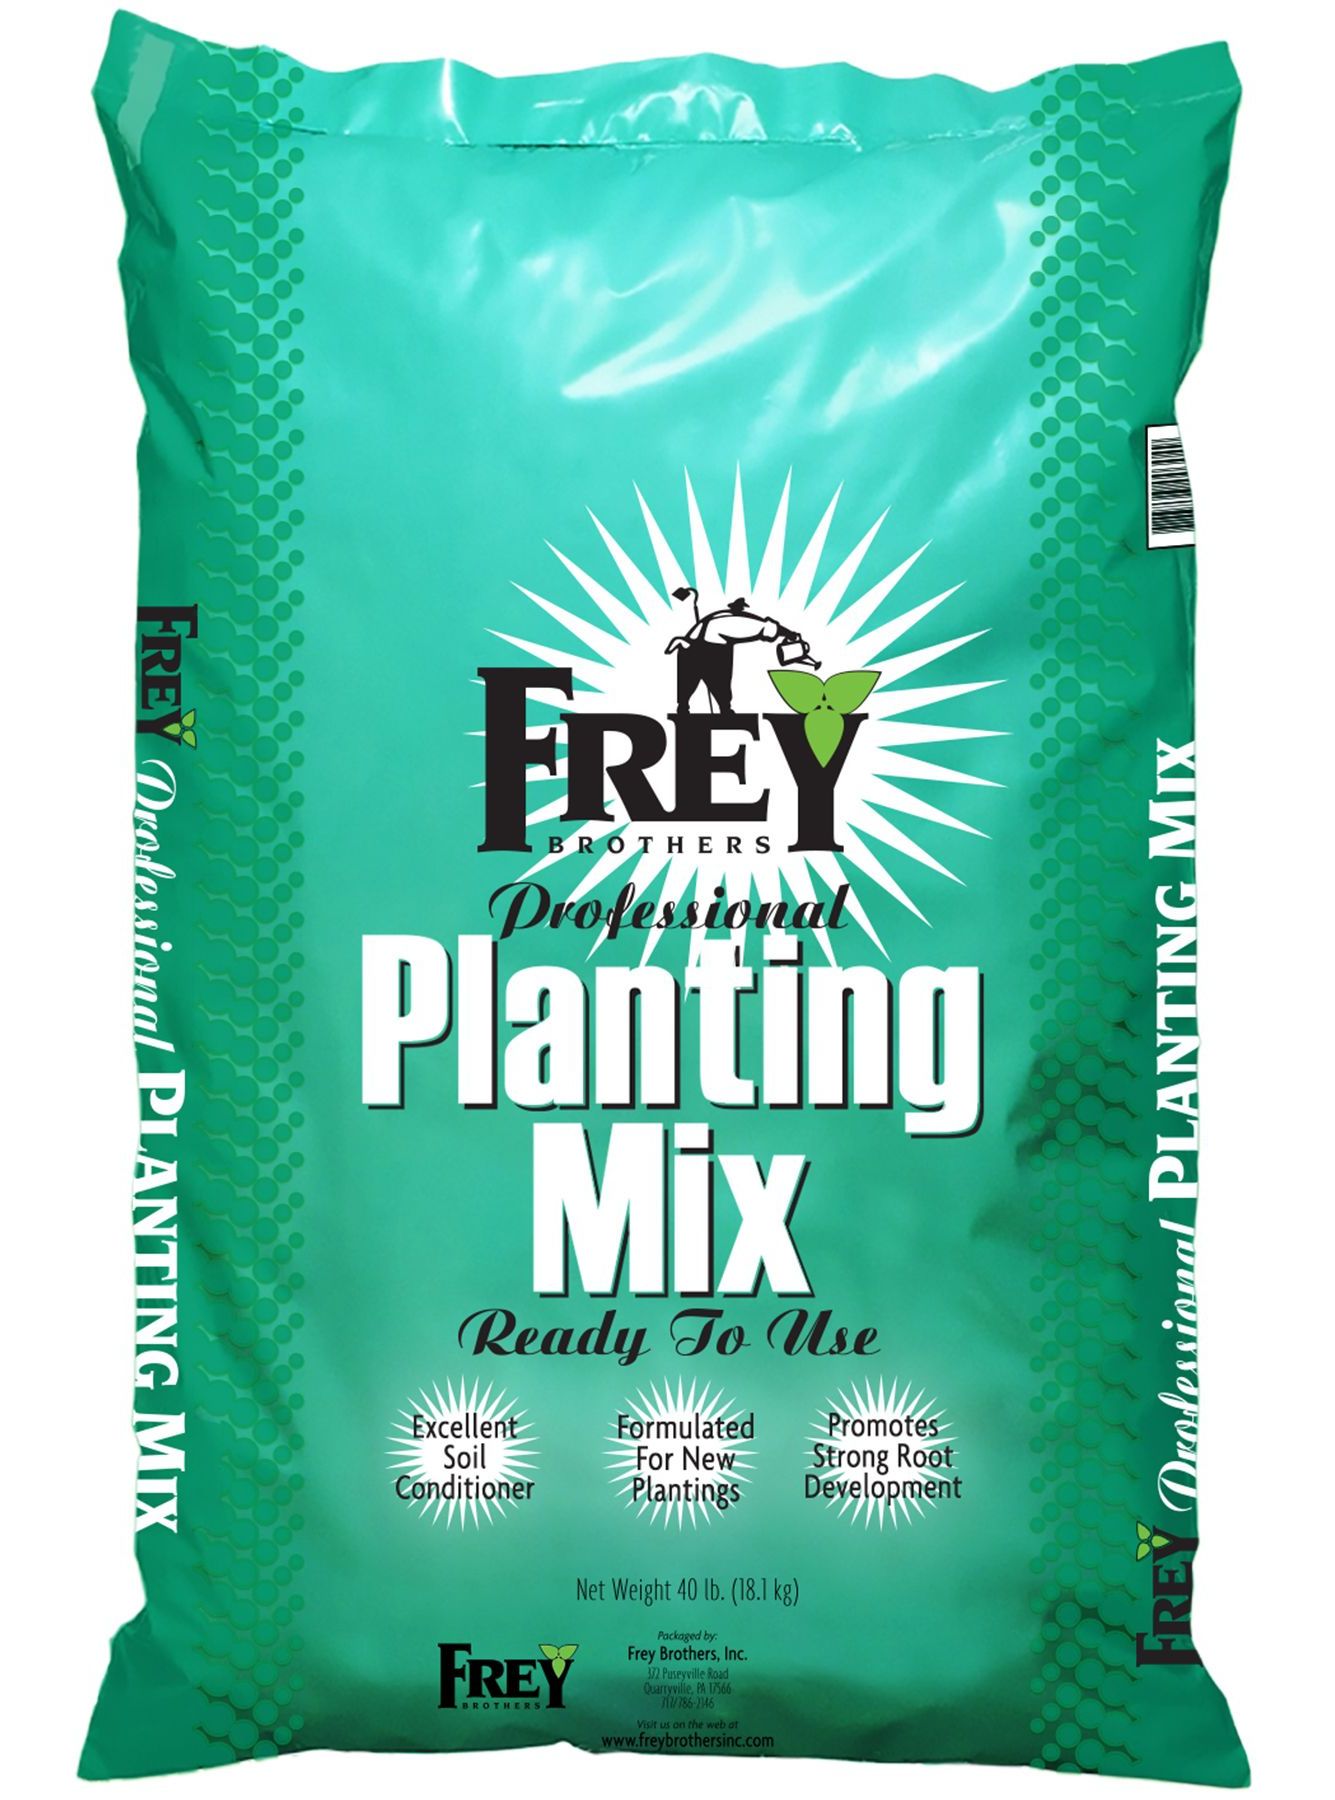 Frey Brothers Professional Planting Mix